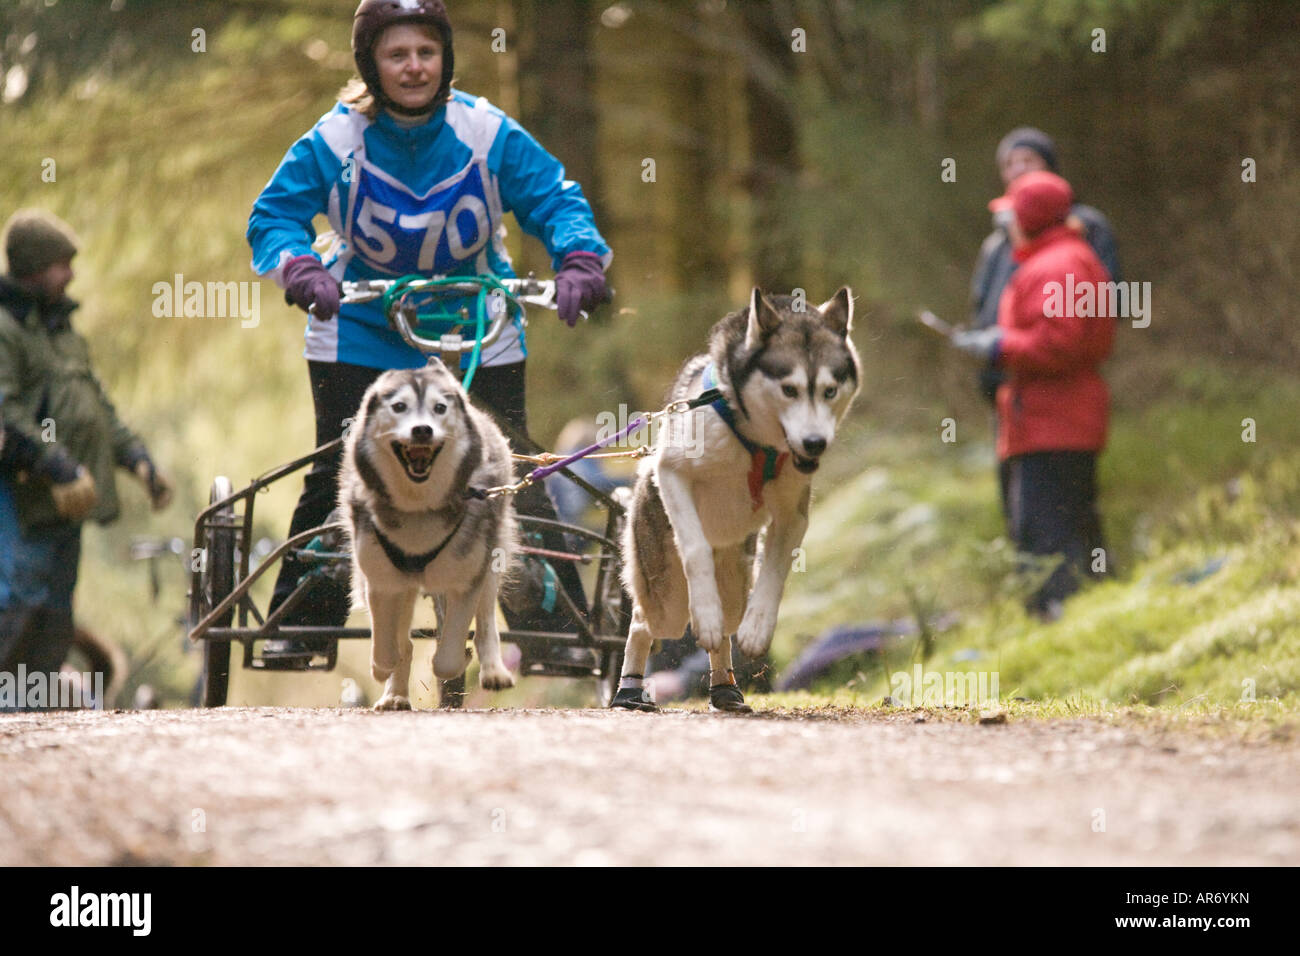 Dog Sport Scotland Husky Huskies teamwork two dog sled racing in Ae Forest Dumfries and Galloway UK Stock Photo